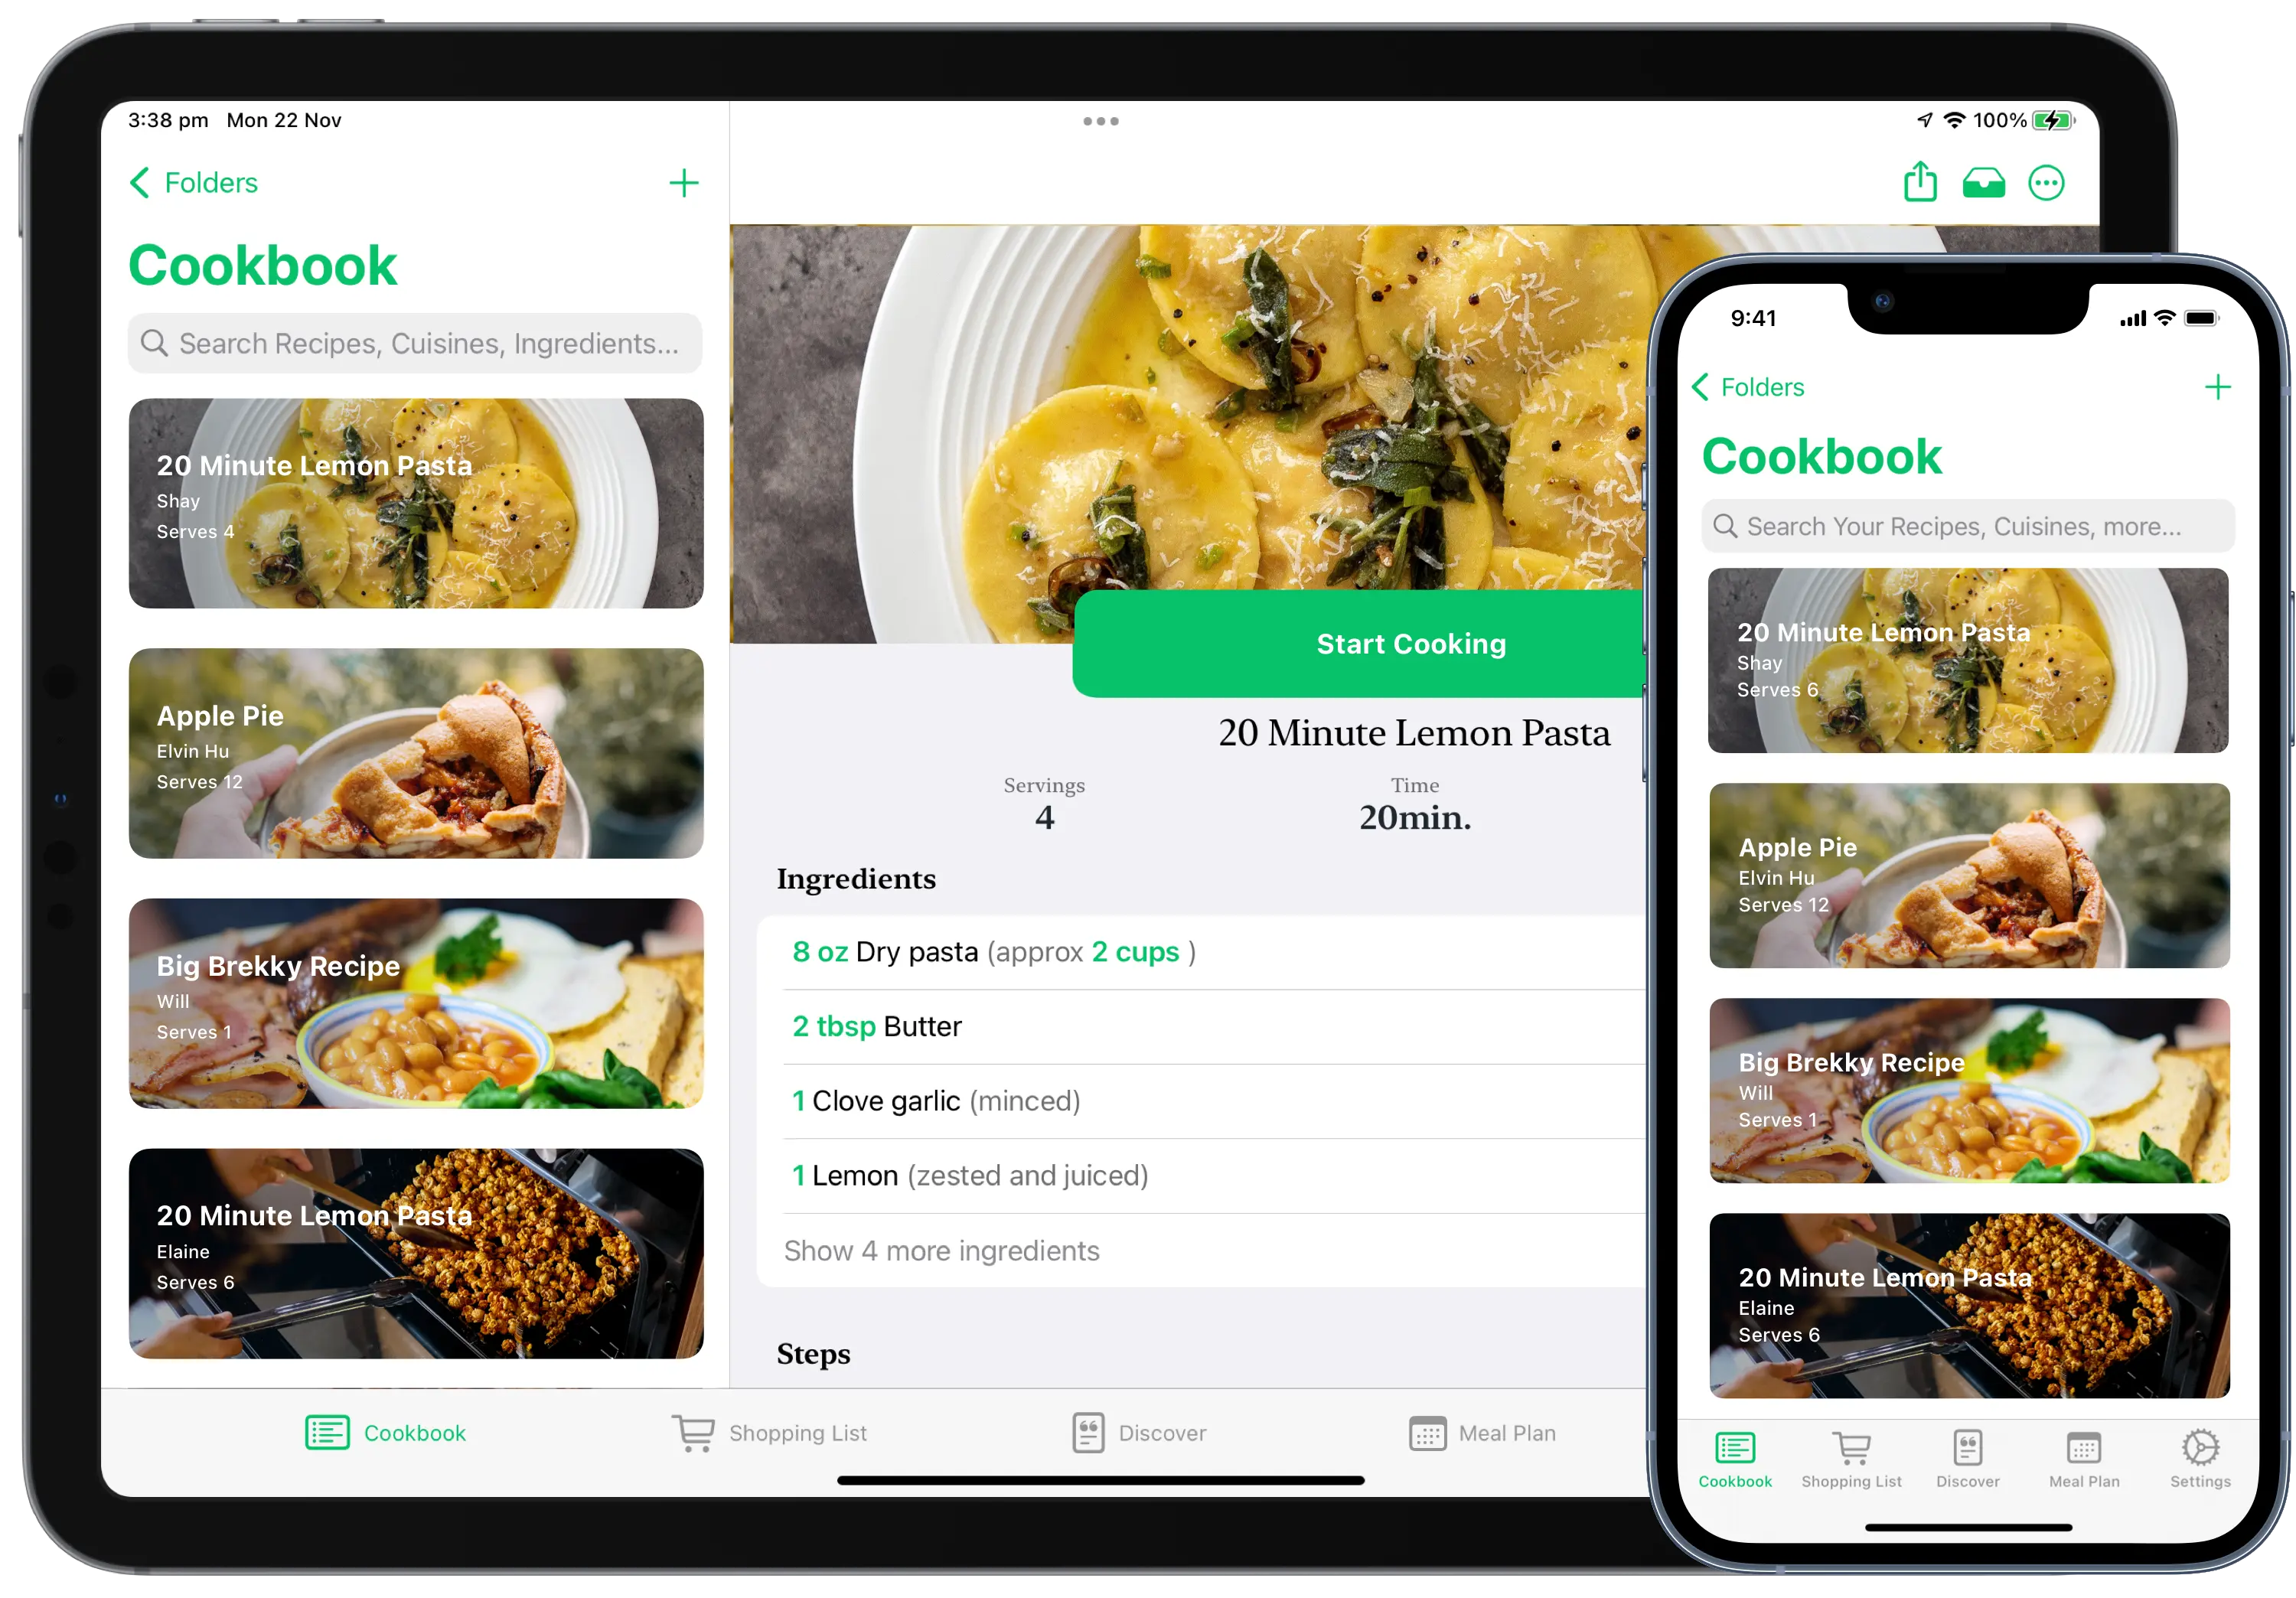 Recipe Keeper: Cookbook App for Android - Free App Download